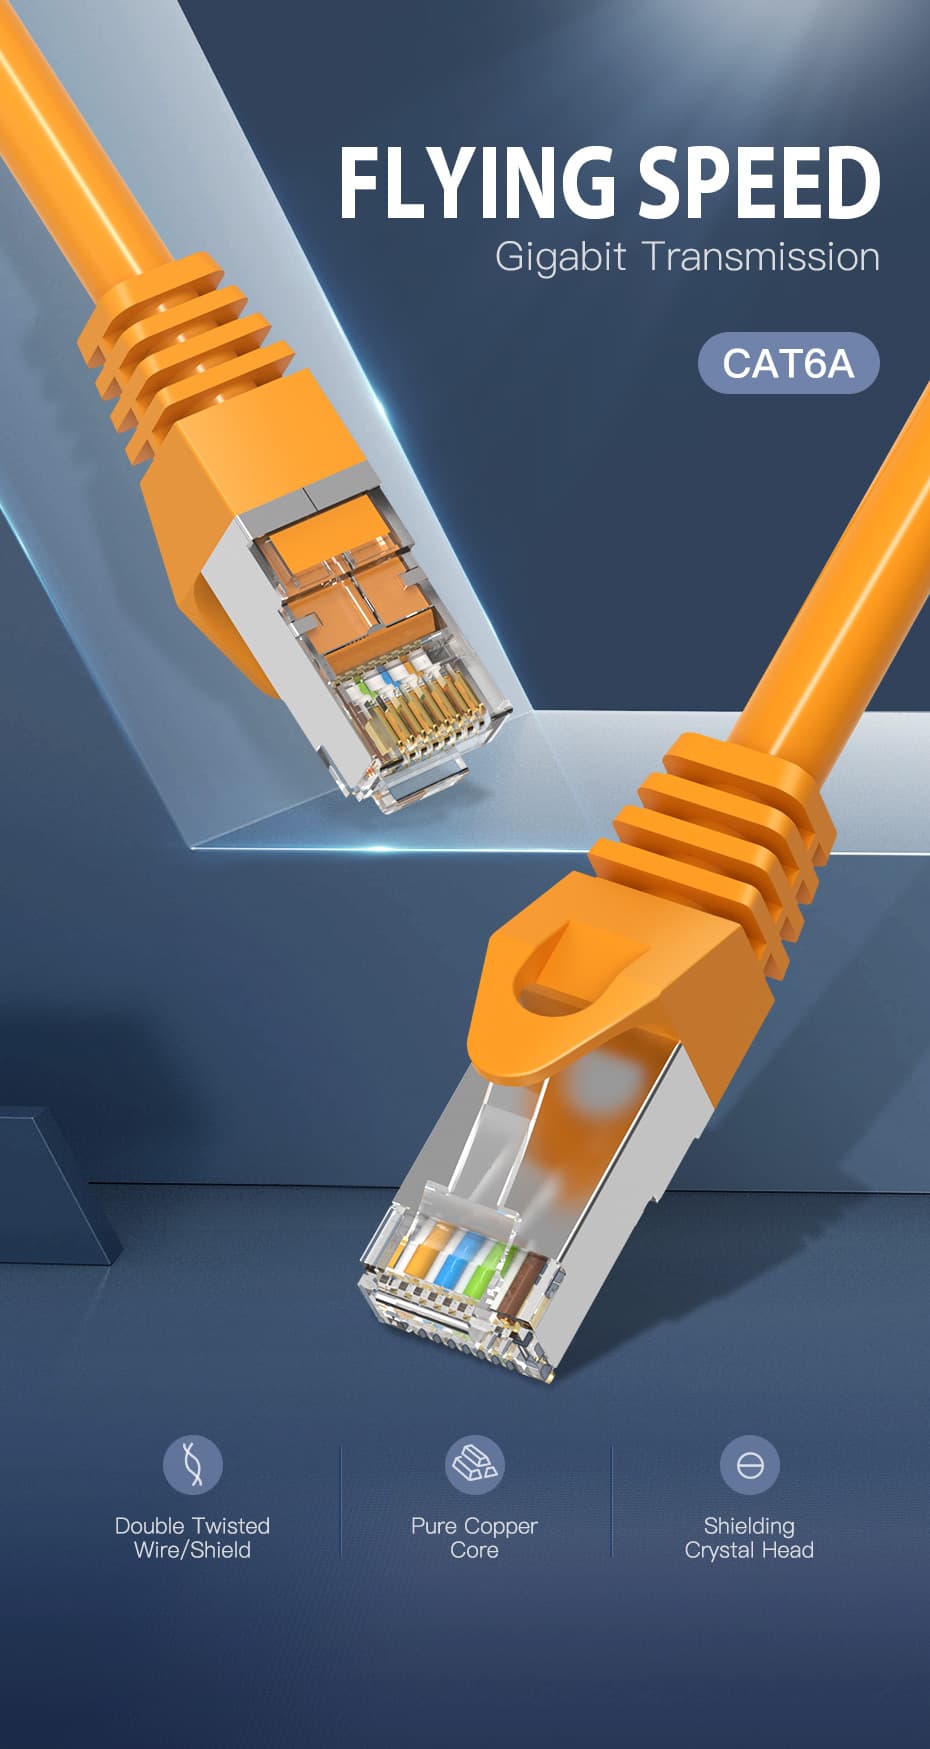 How to Choose a Network Cable